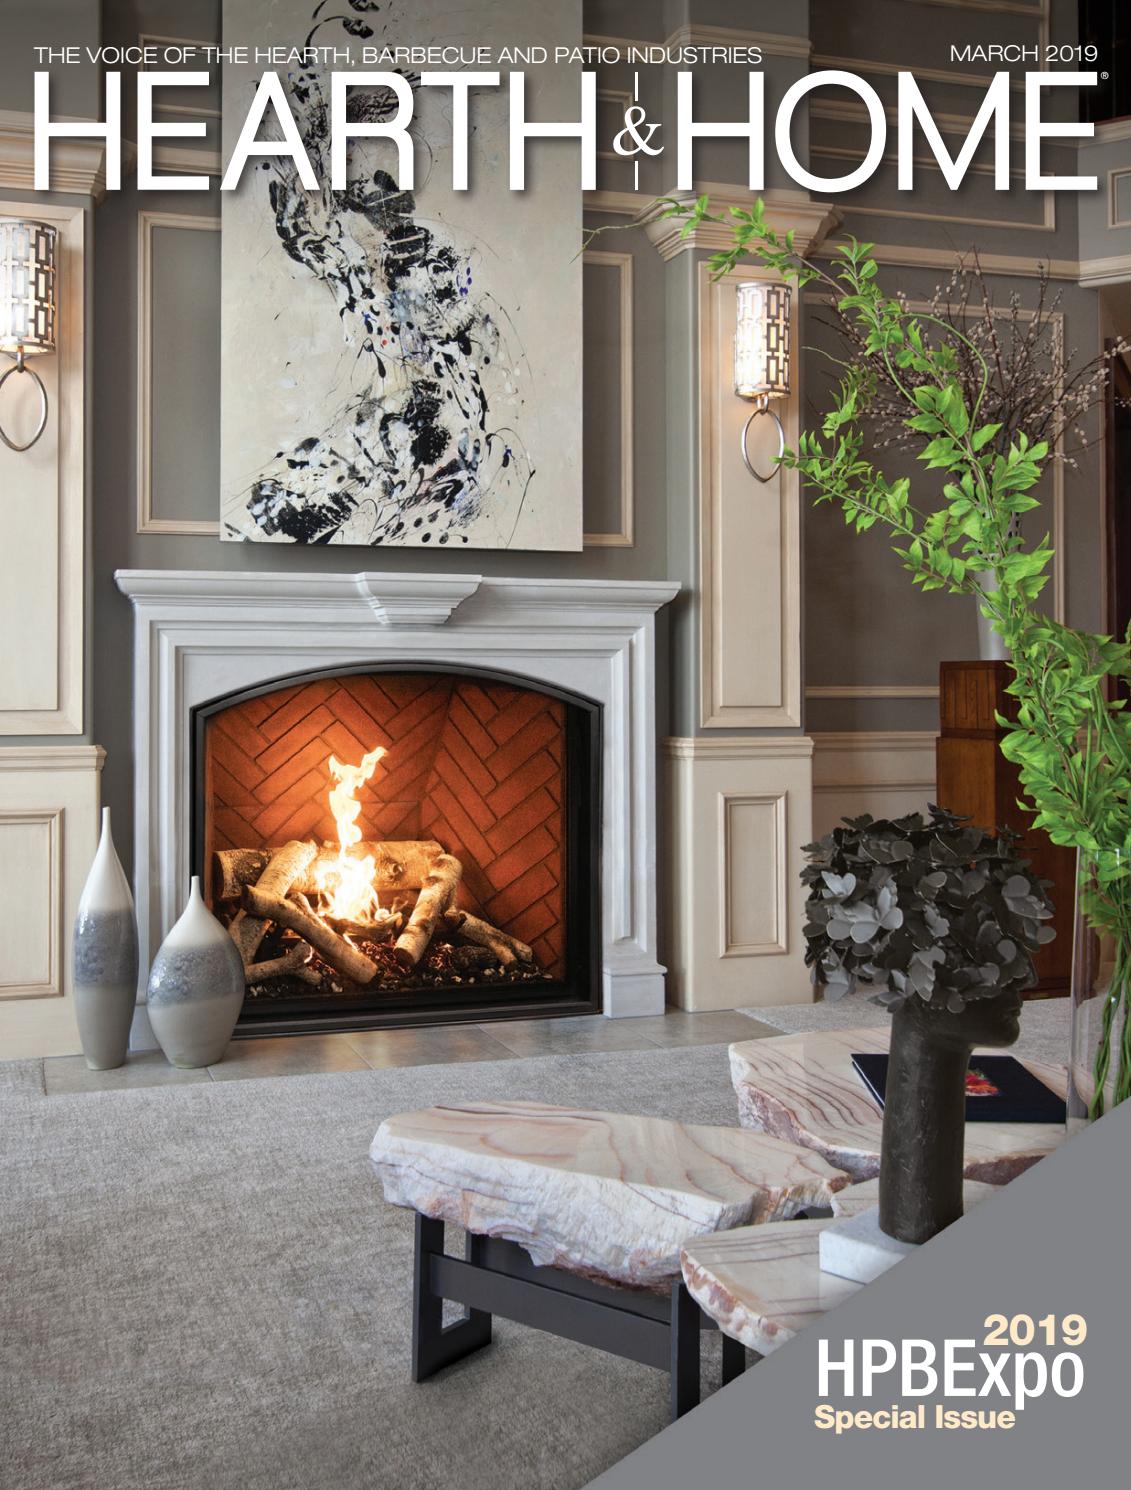 Fireplace with Windows On Both Sides Inspirational Hearth & Home Magazine – 2019 March issue by Hearth & Home